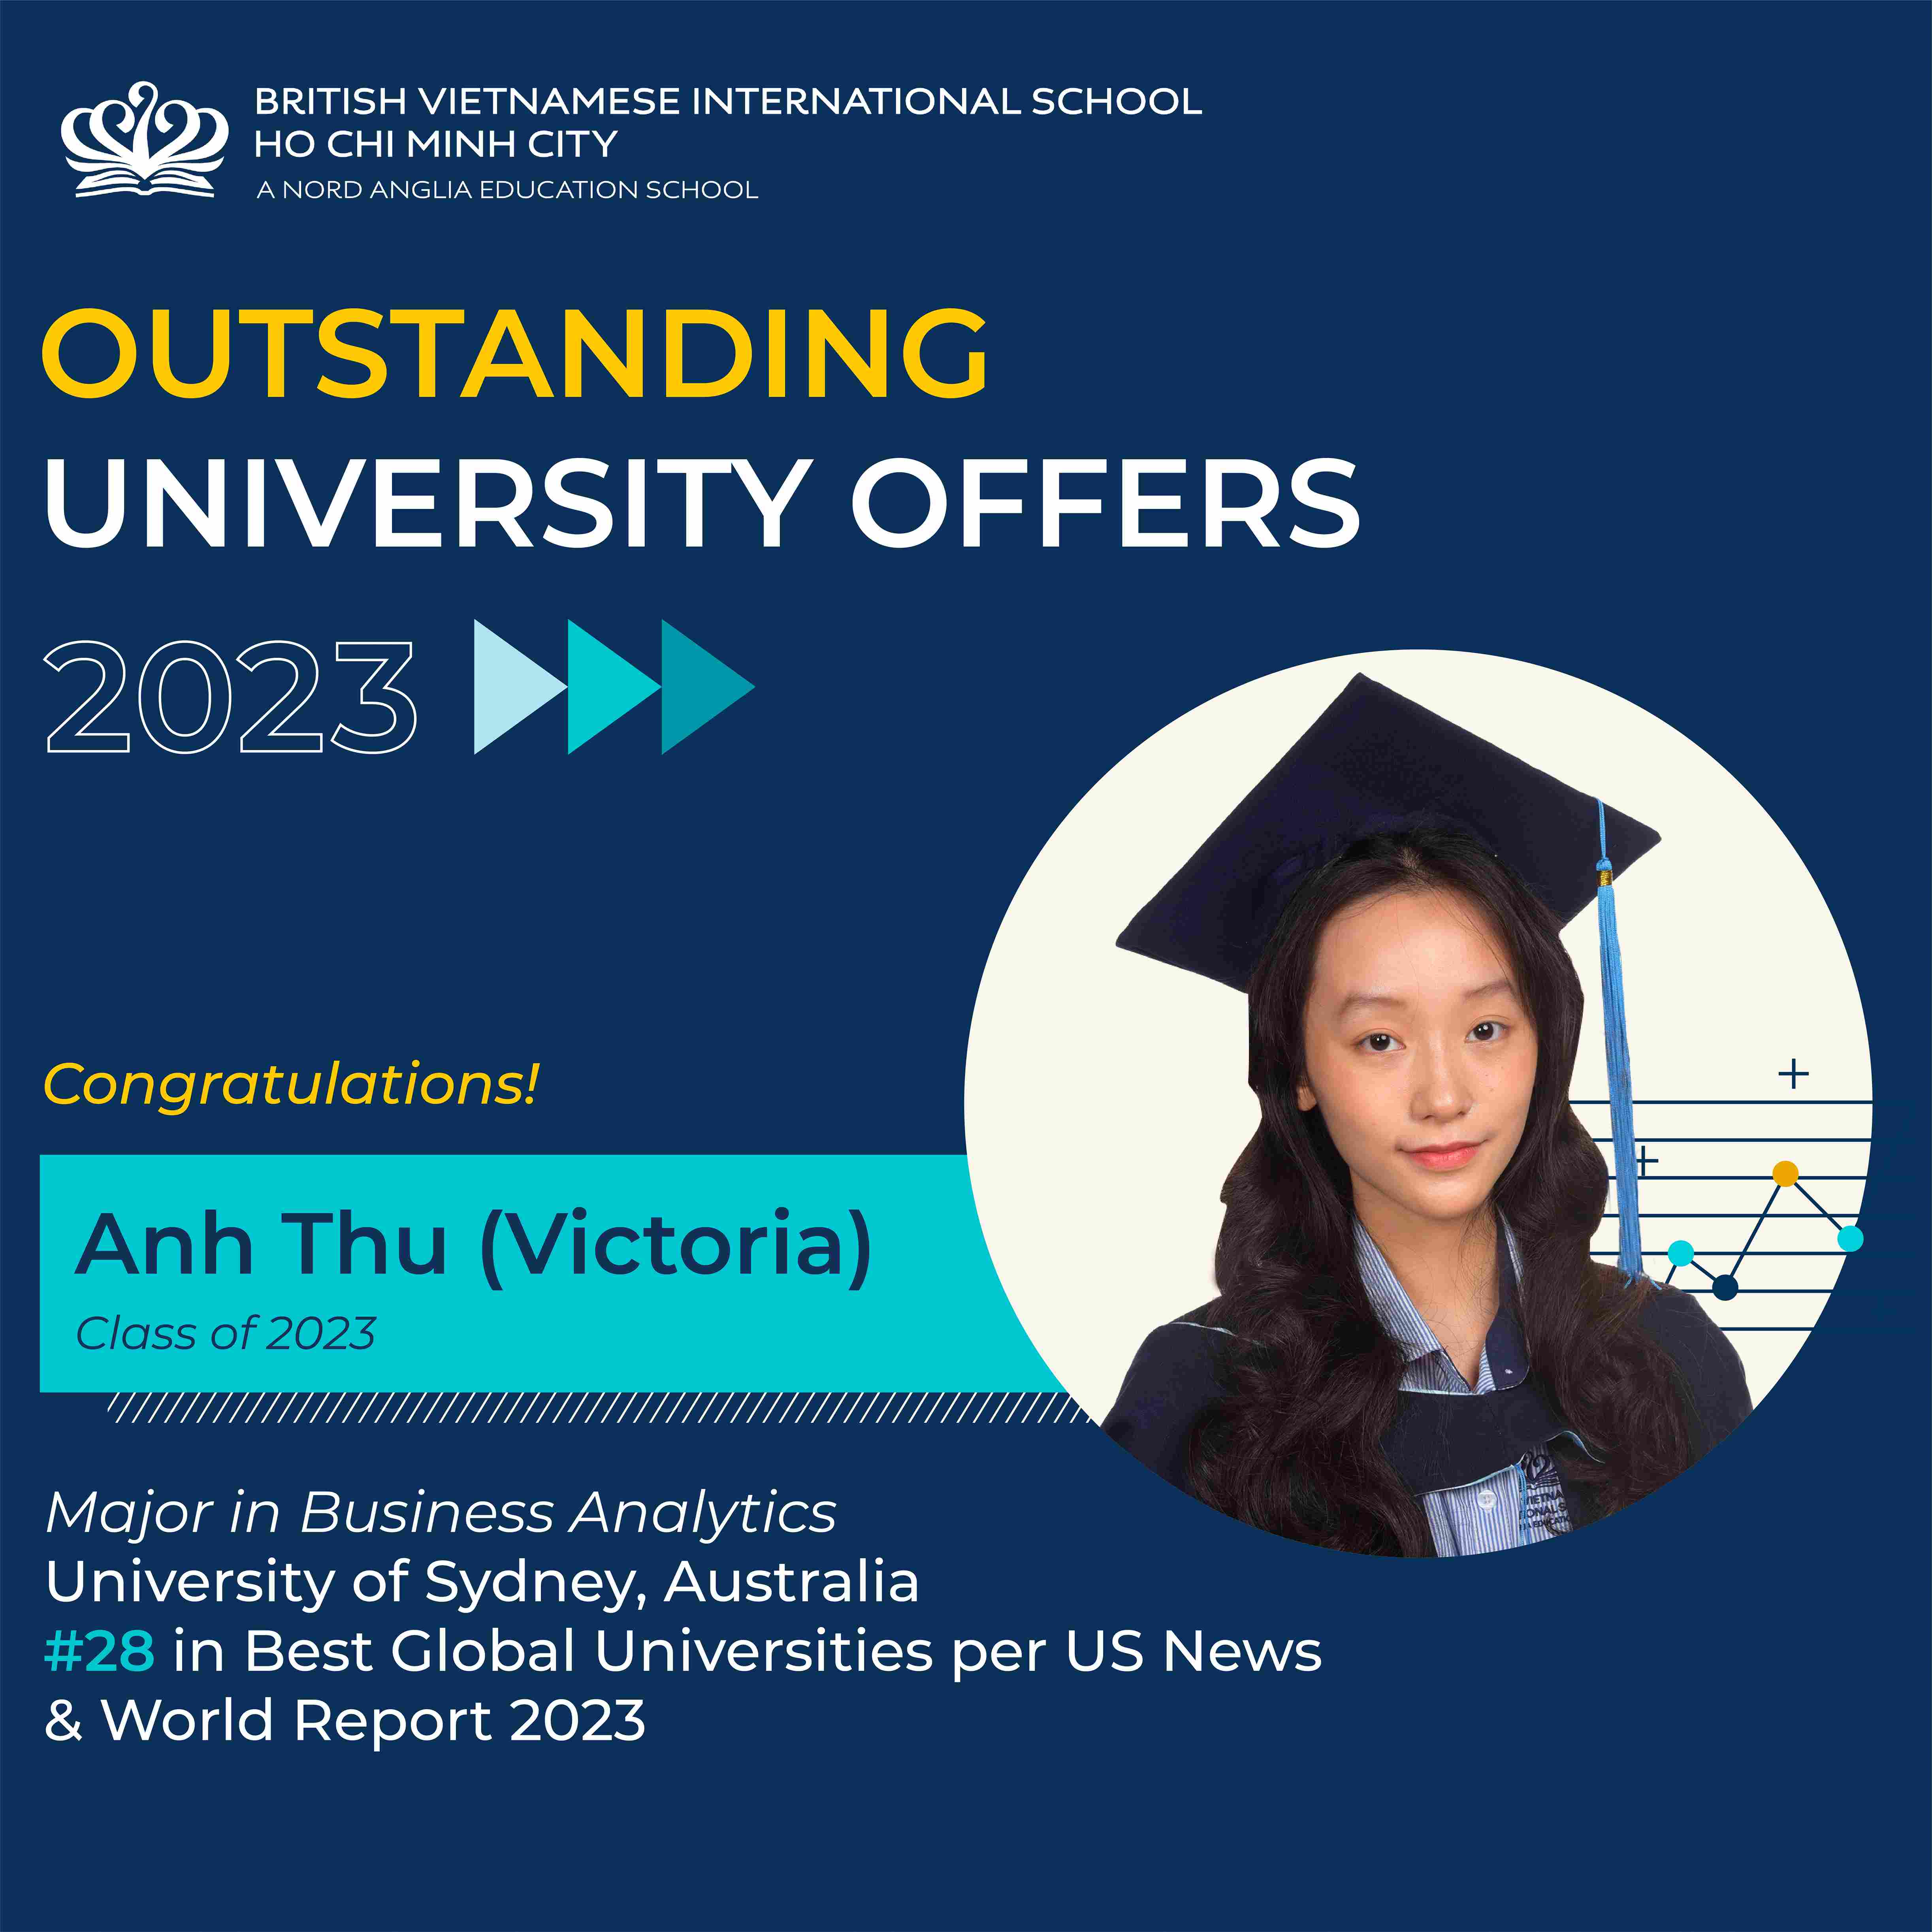 Congratulations to Anh Thu on her outstanding acceptance into the top-ranking university in Australia - The University of Sydney! - Nguyen Dang Anh Thu outstanding acceptance into the University of Sydney